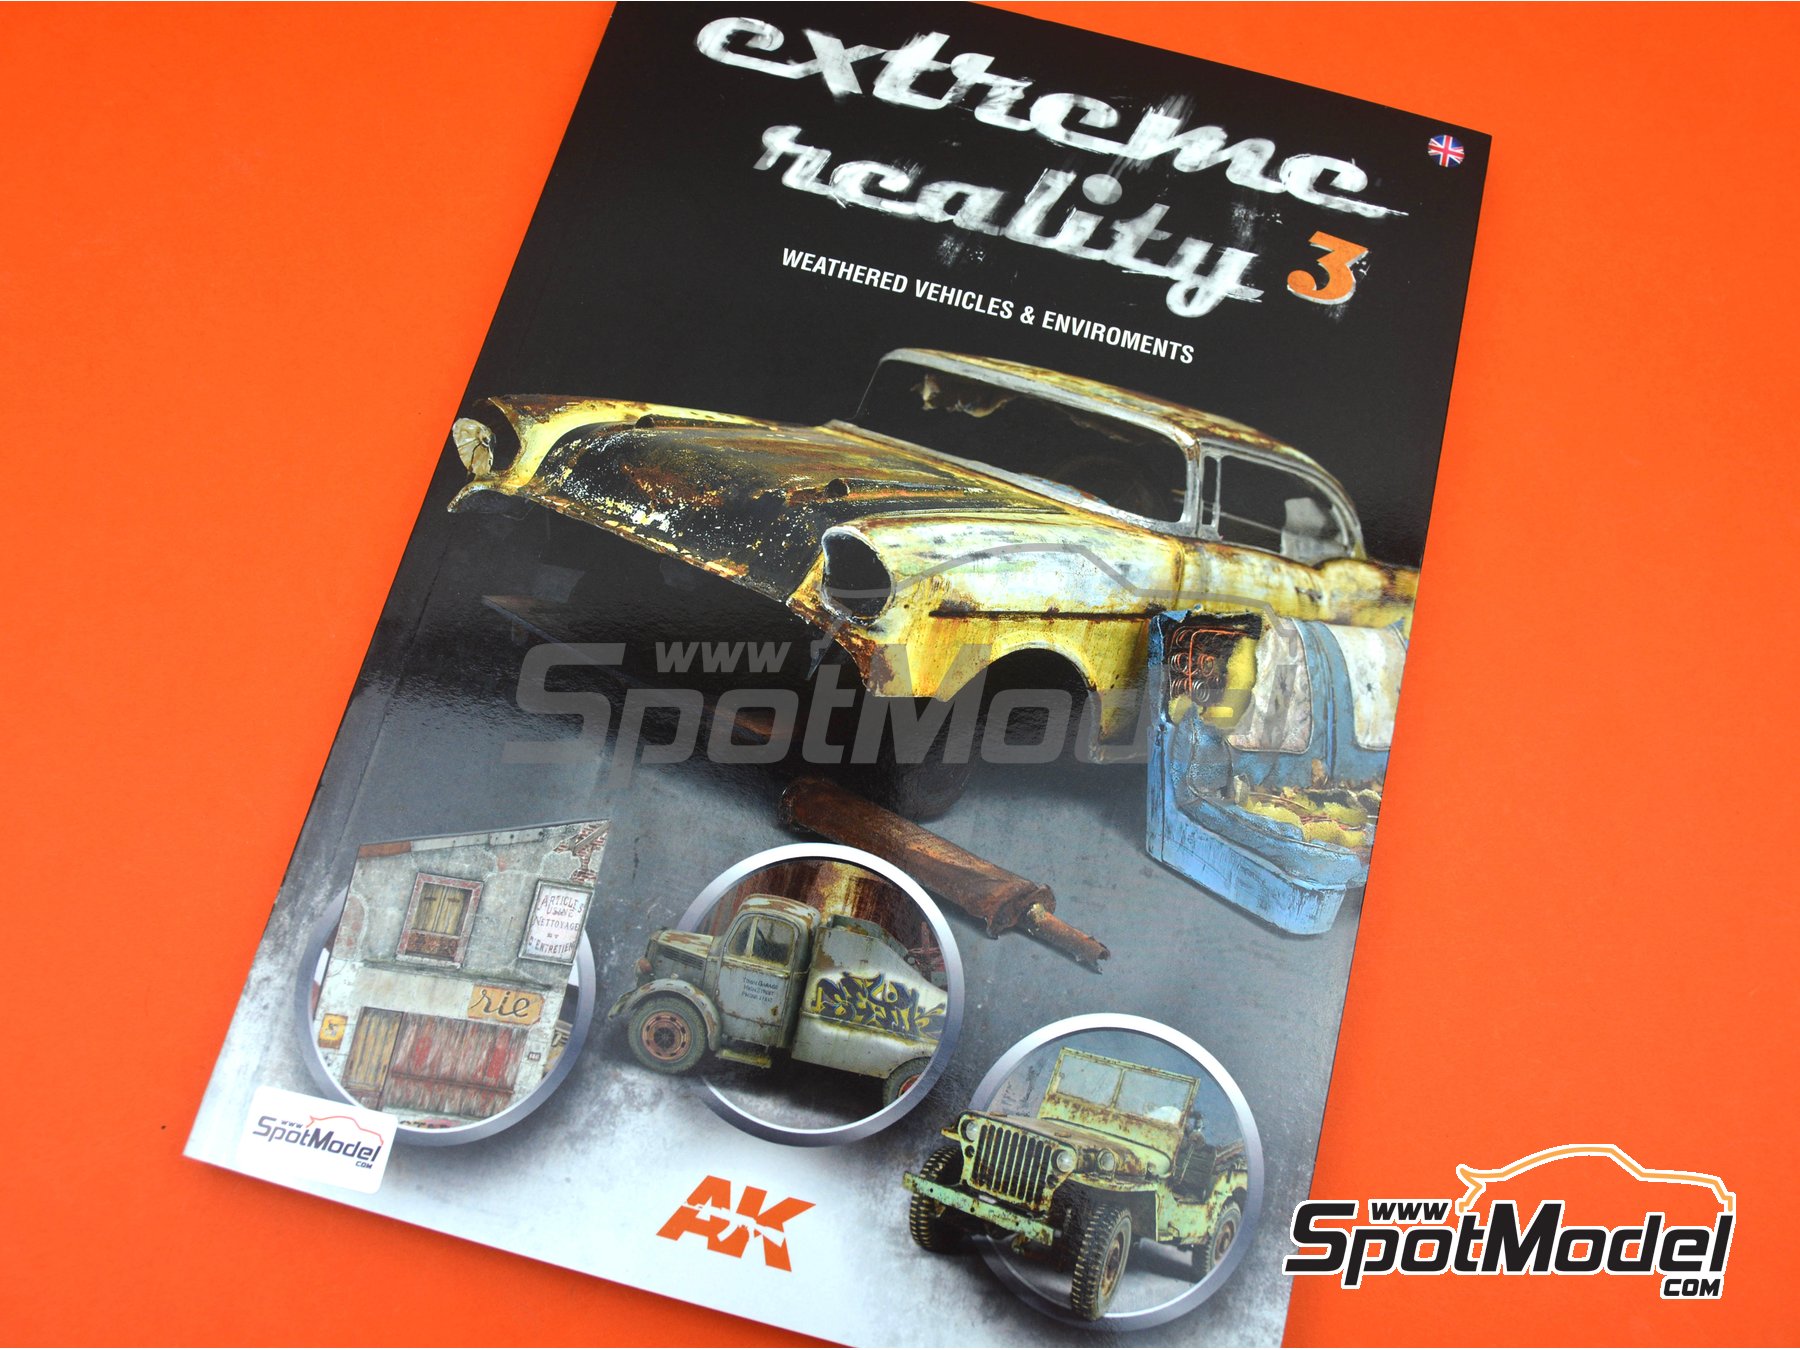 AK INTERACTIVE Extreme Reality 3 Weathered Vehicles & Environments Book AK510 